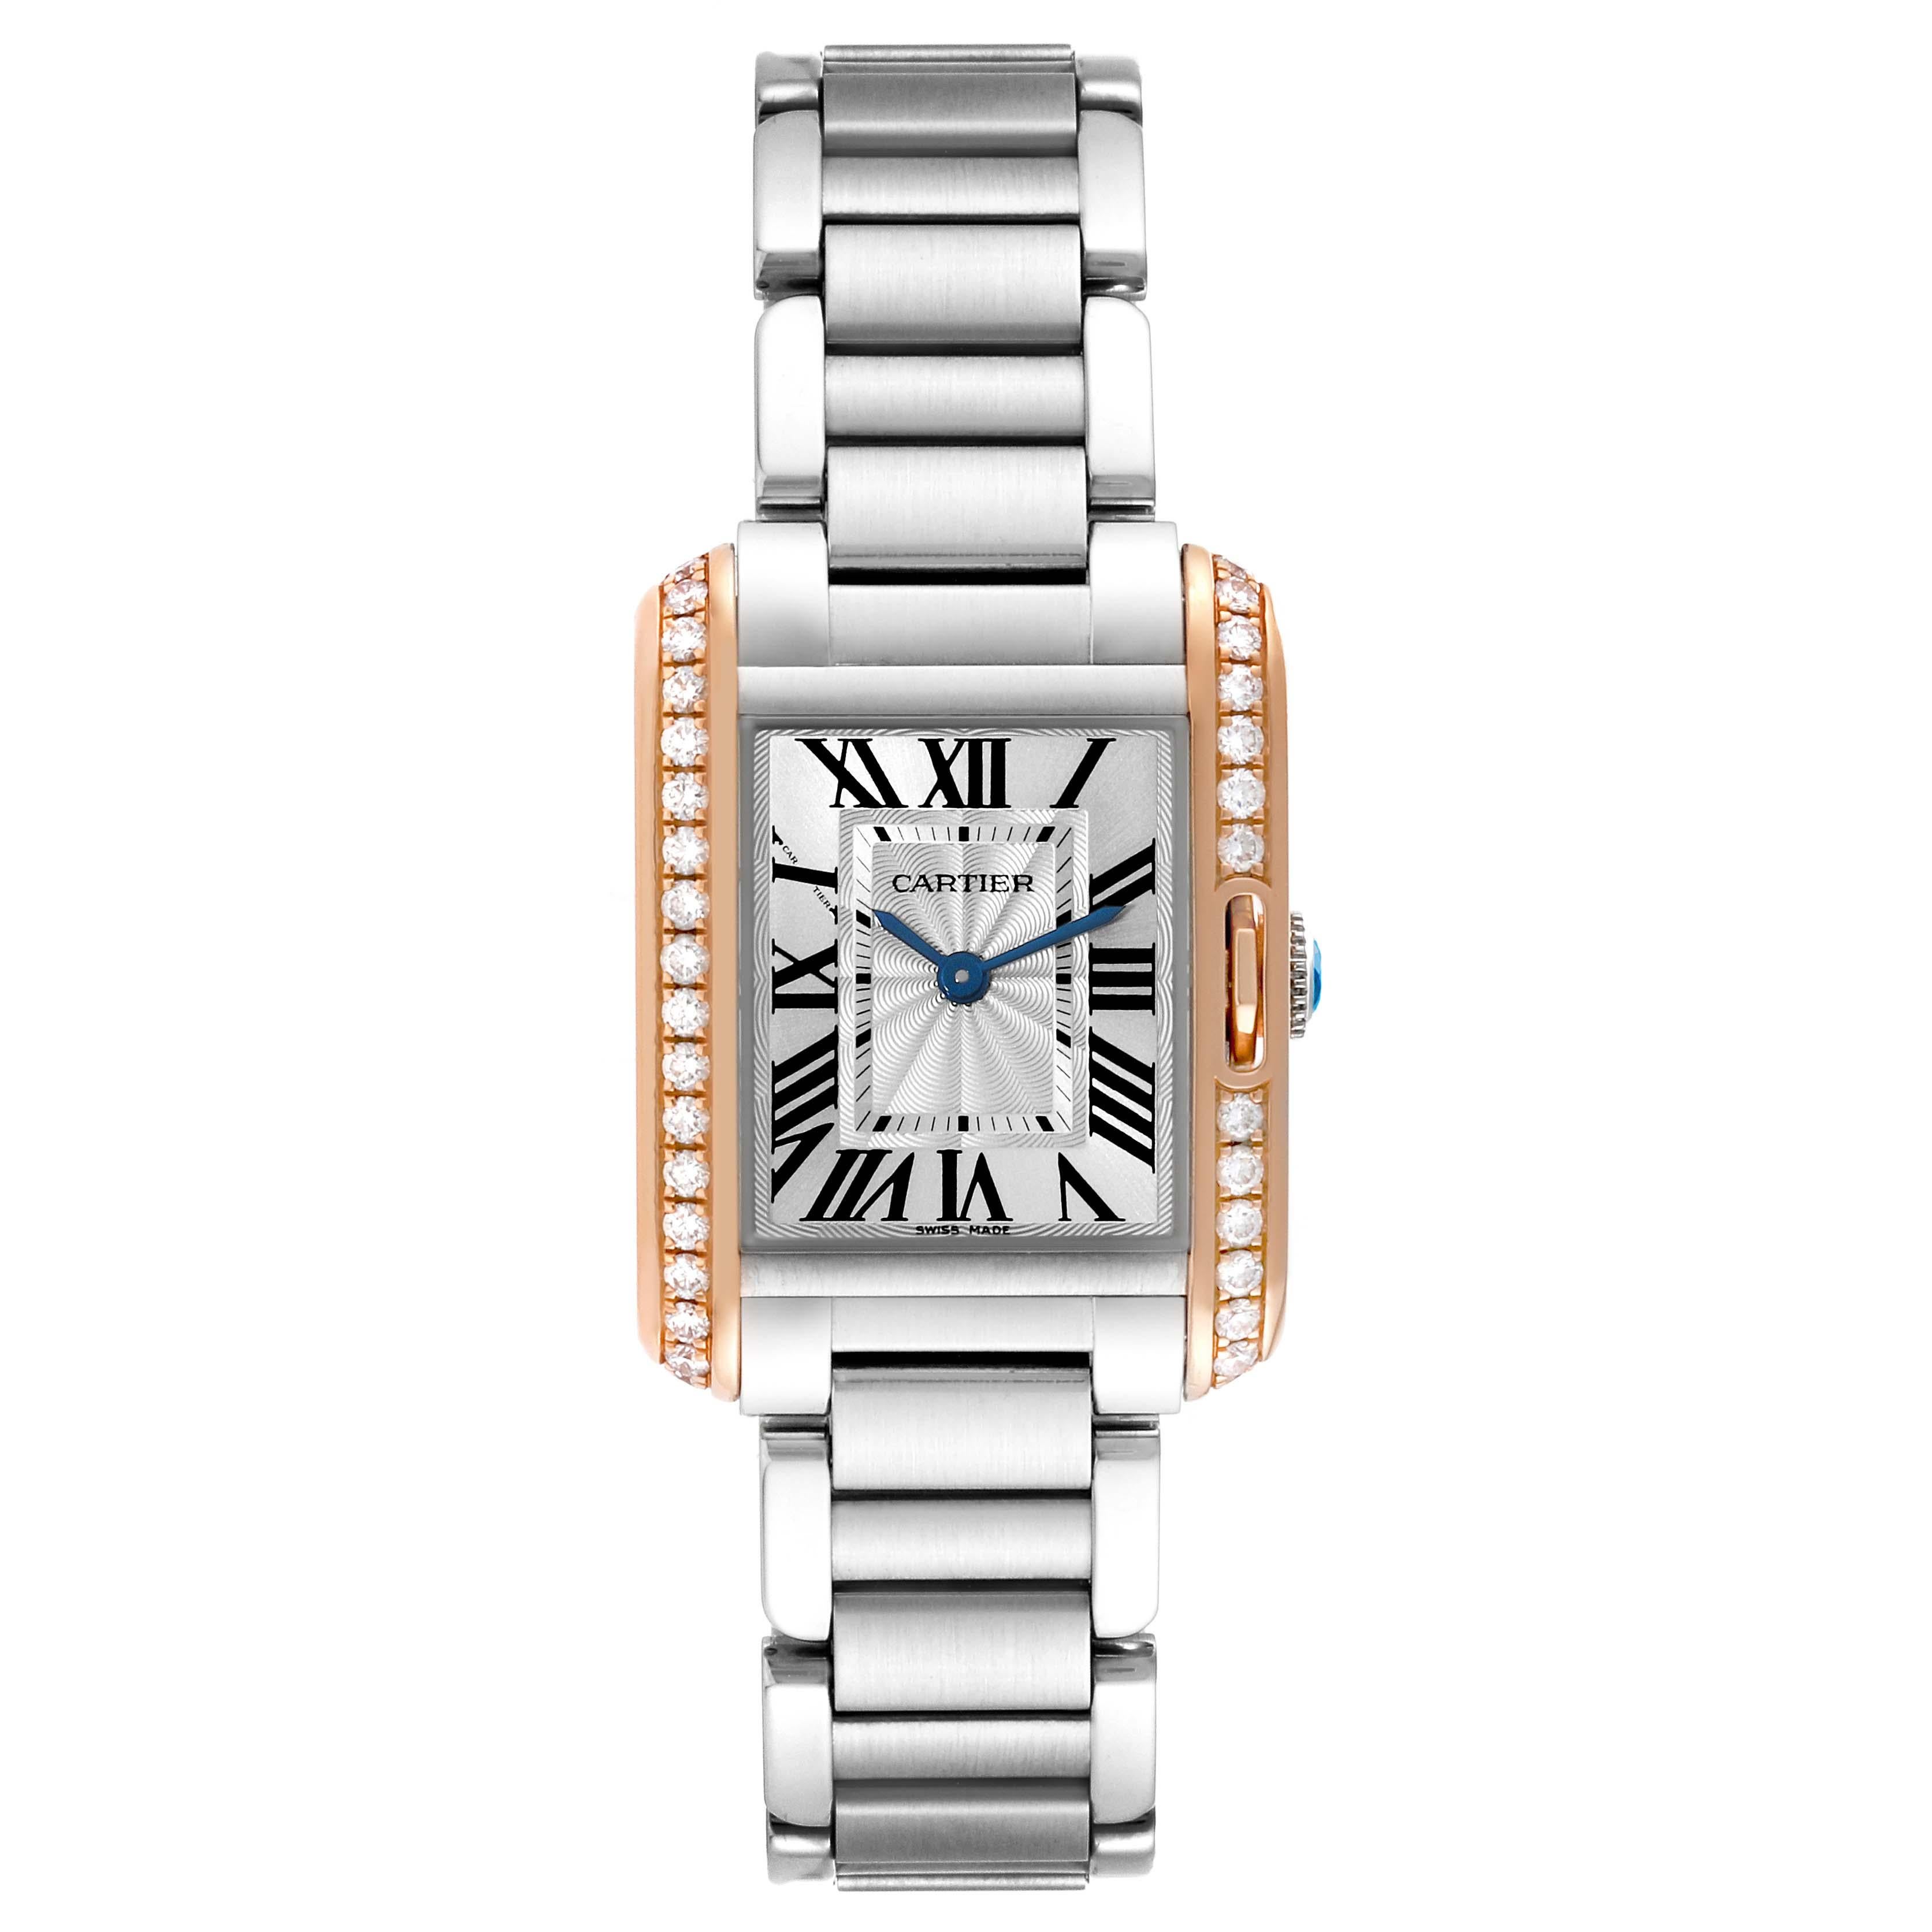 Cartier Tank Anglaise Steel Rose Gold Diamond Ladies Watch W3TA0002 Box Card. Quartz movement. Stainless steel and 18k rose gold case 30.2 x 22.7 mm. Circular grained crown set with a blue spinel cabachon. 18k rose gold original Cartier factory